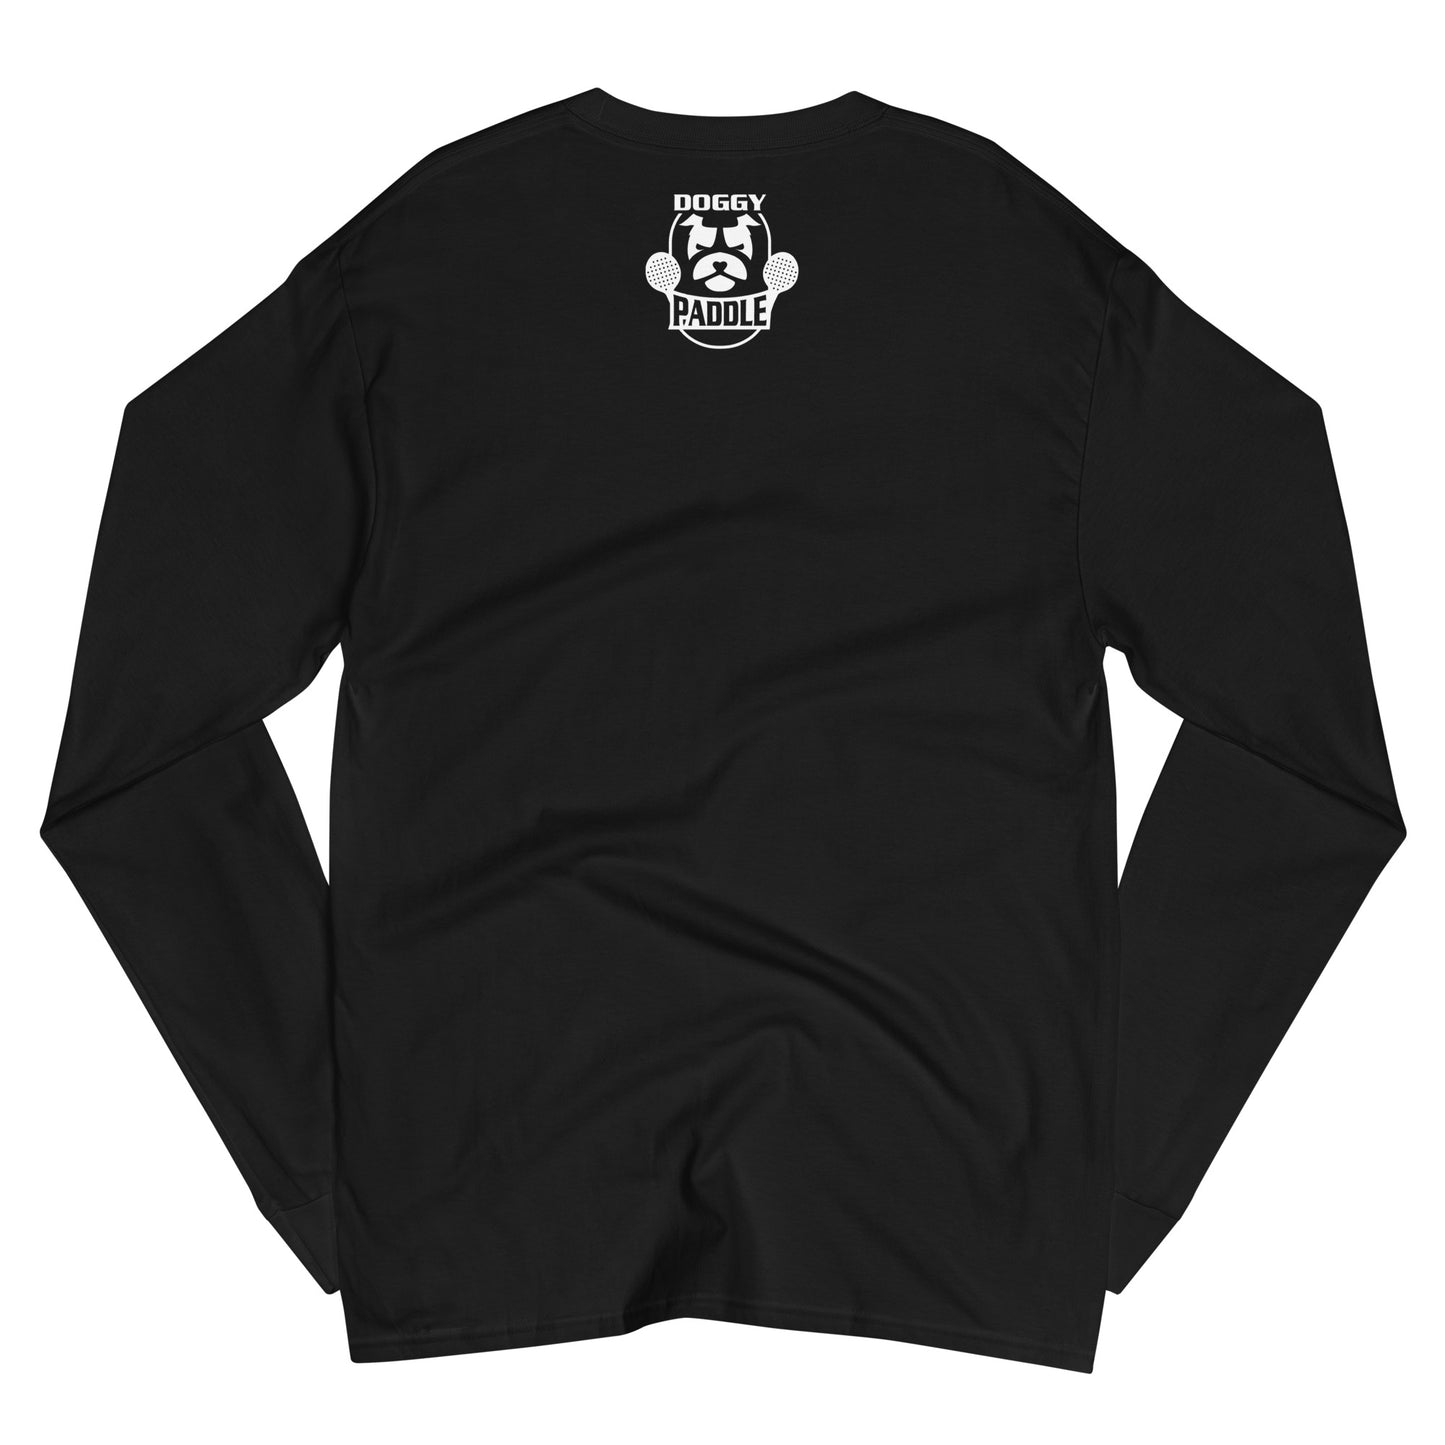 Undefeated Champion Long Sleeve